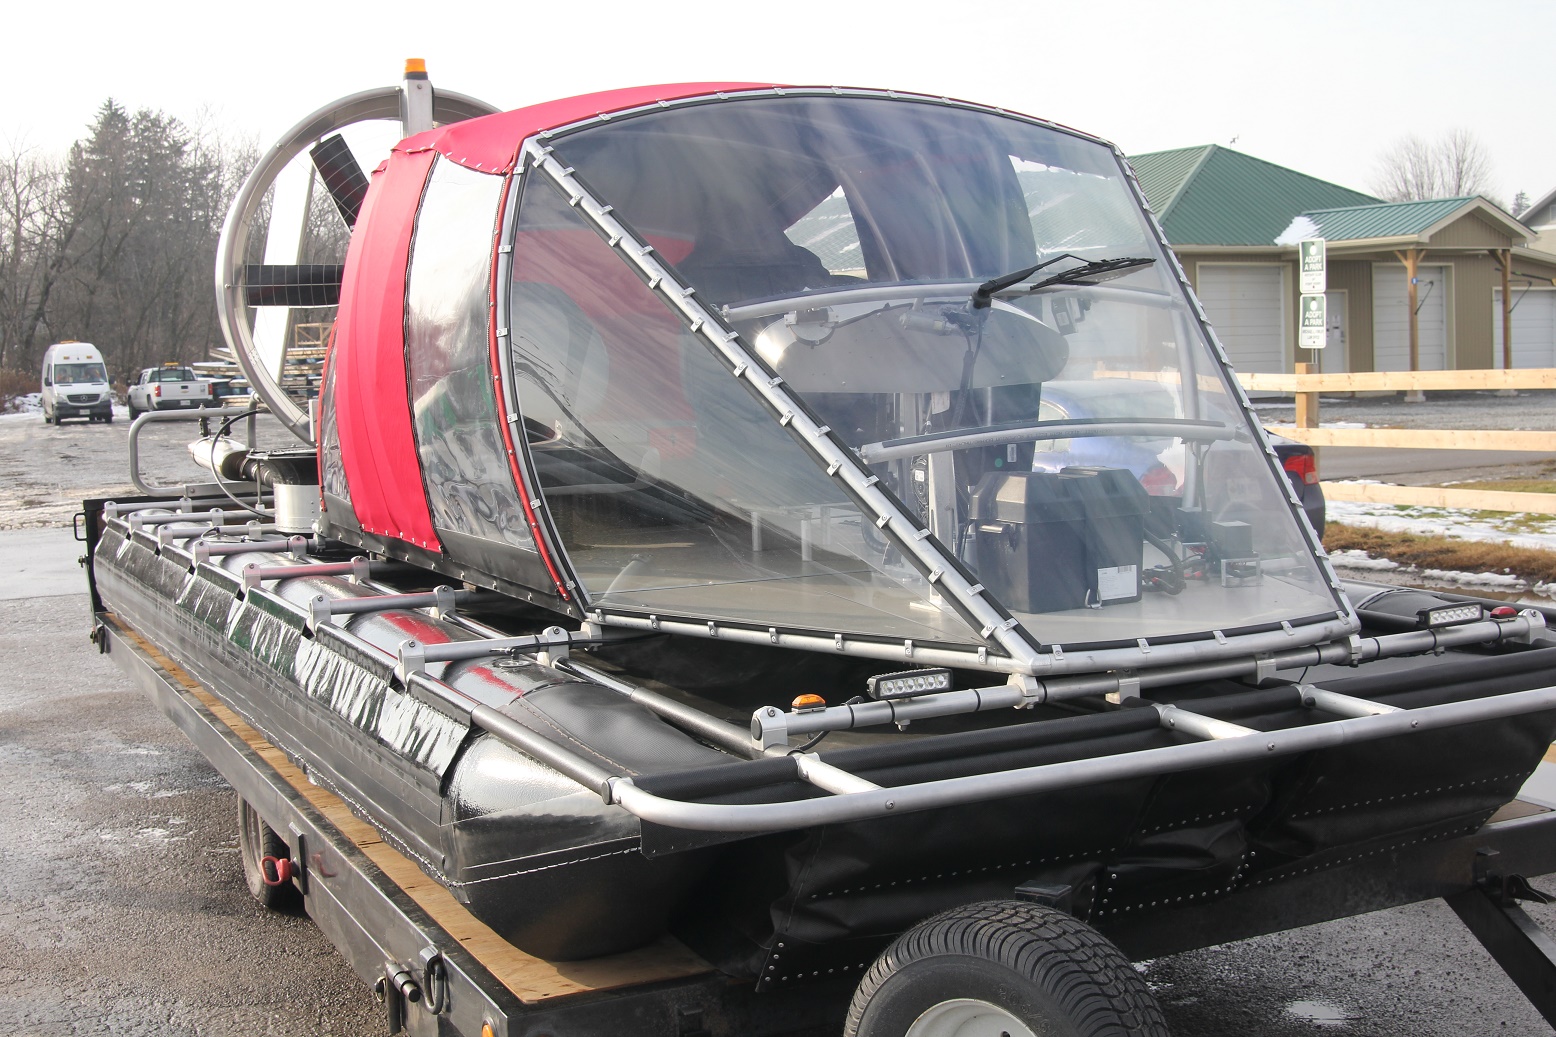 ATASD hovercraft airboat on the trailer